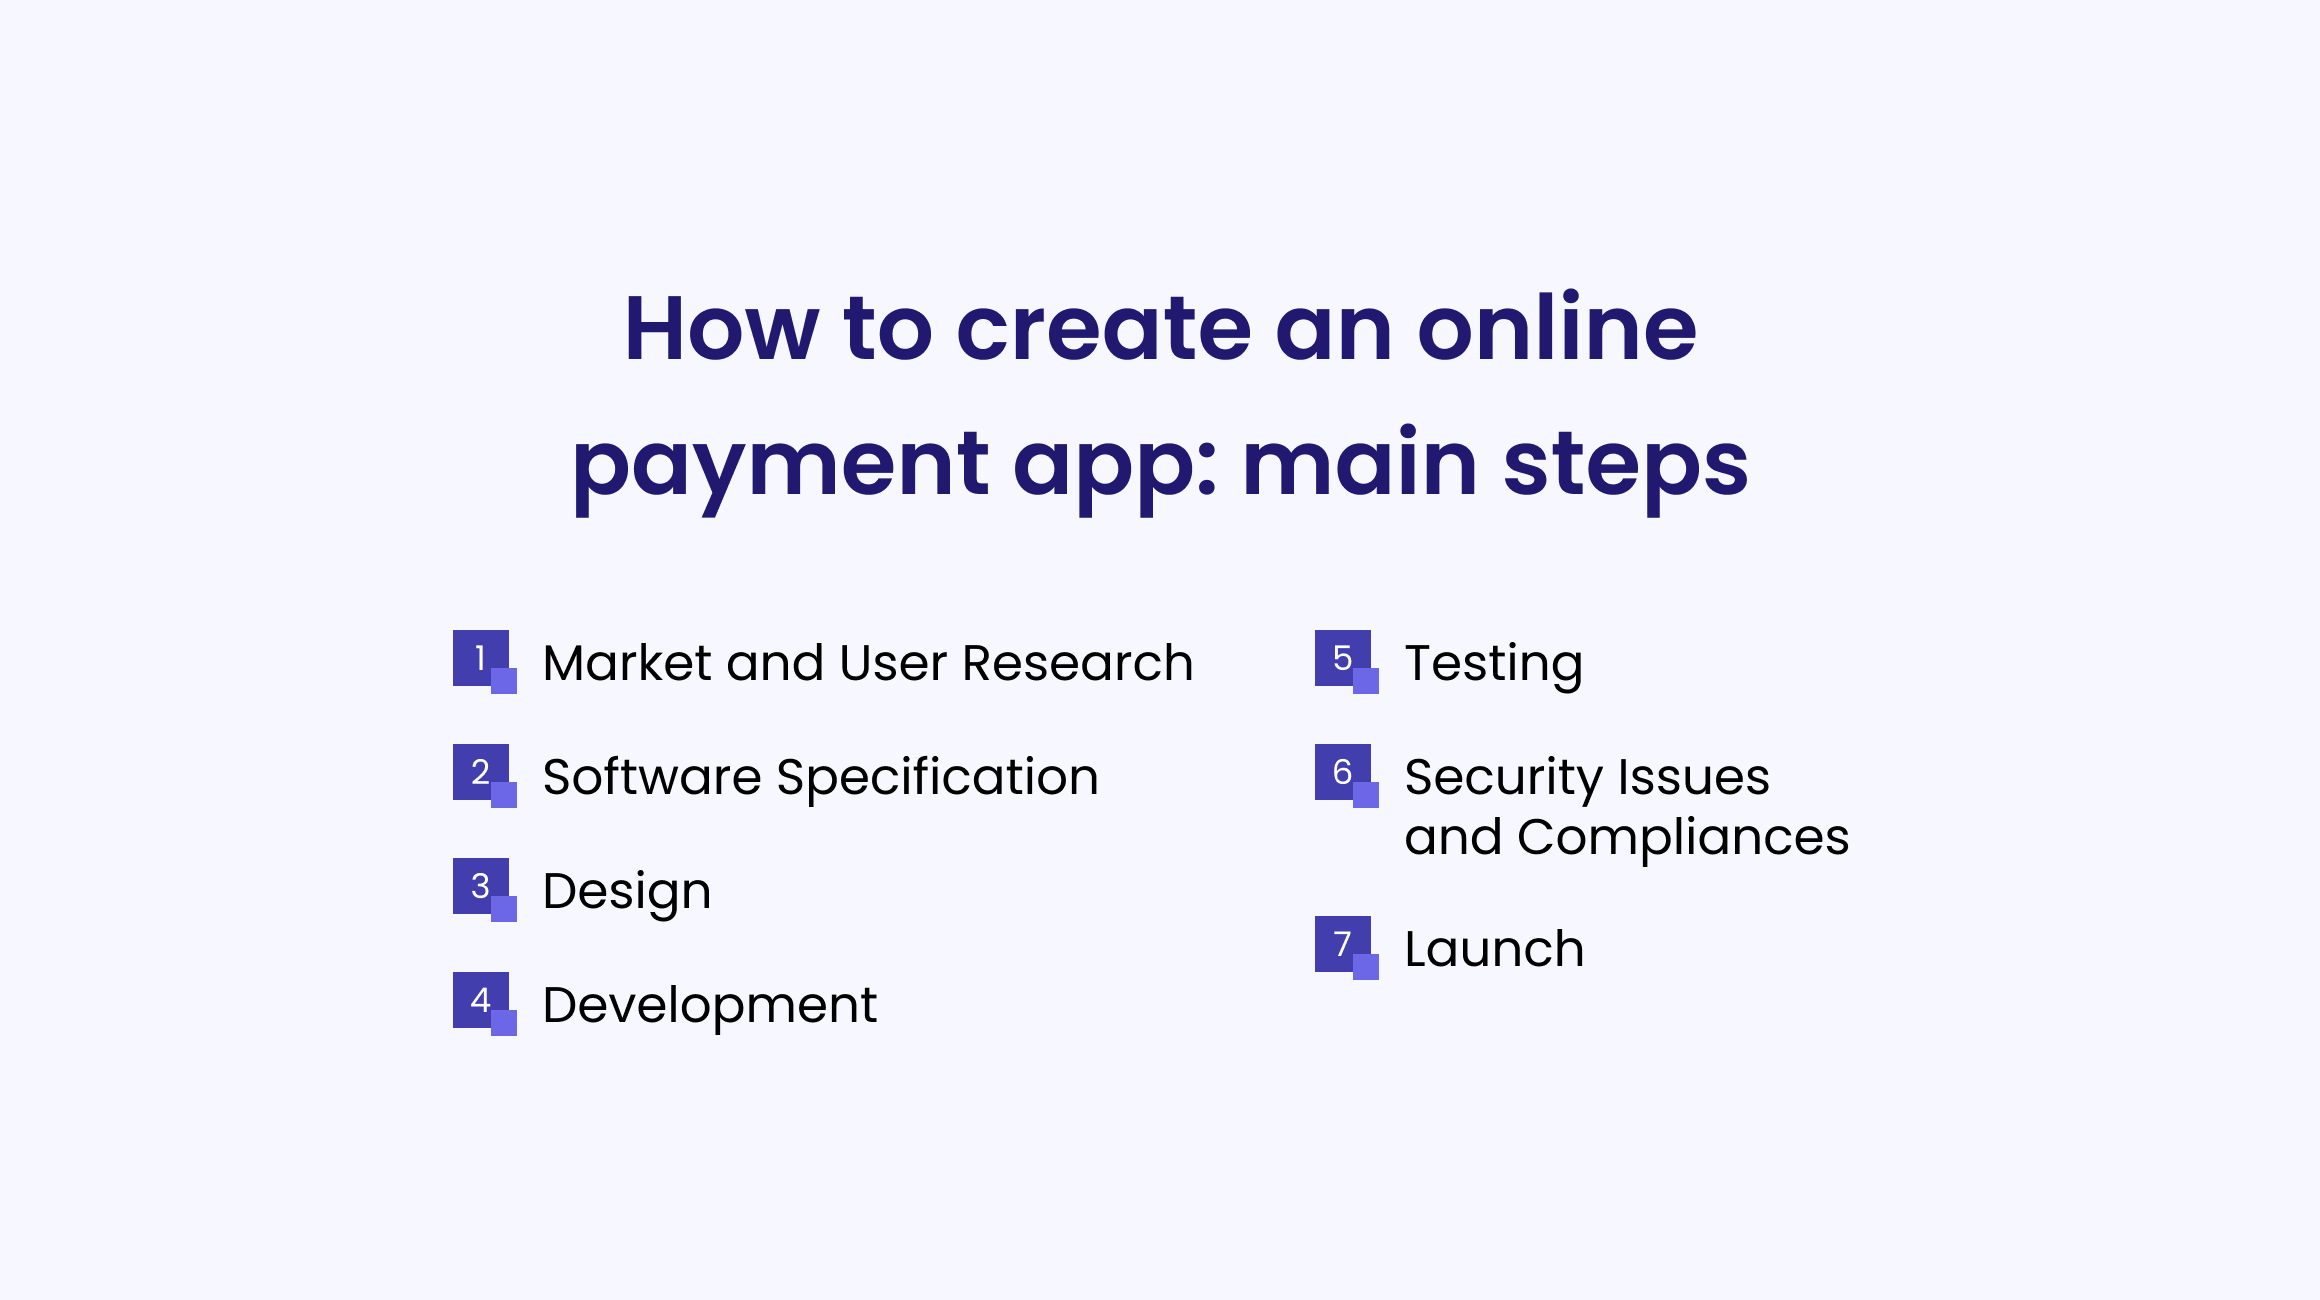 How to create an online payment app 